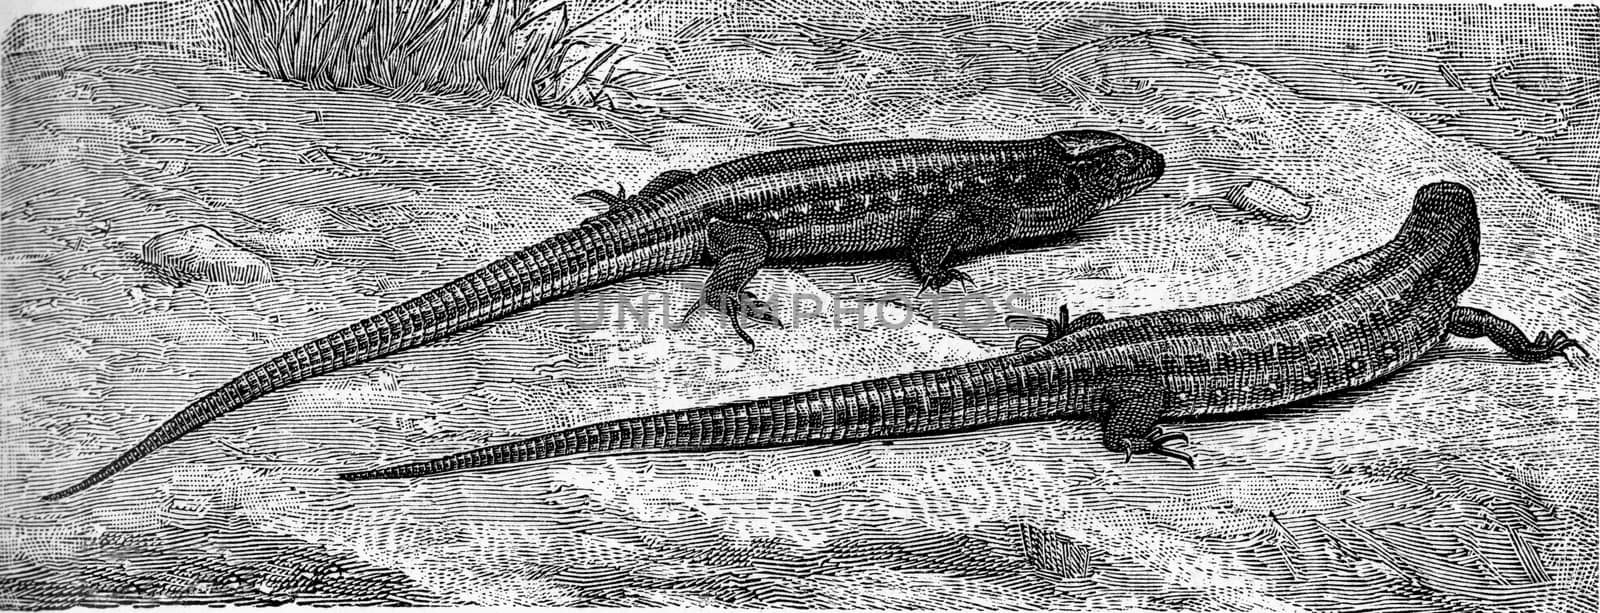 The common lizard, vintage engraving. by Morphart